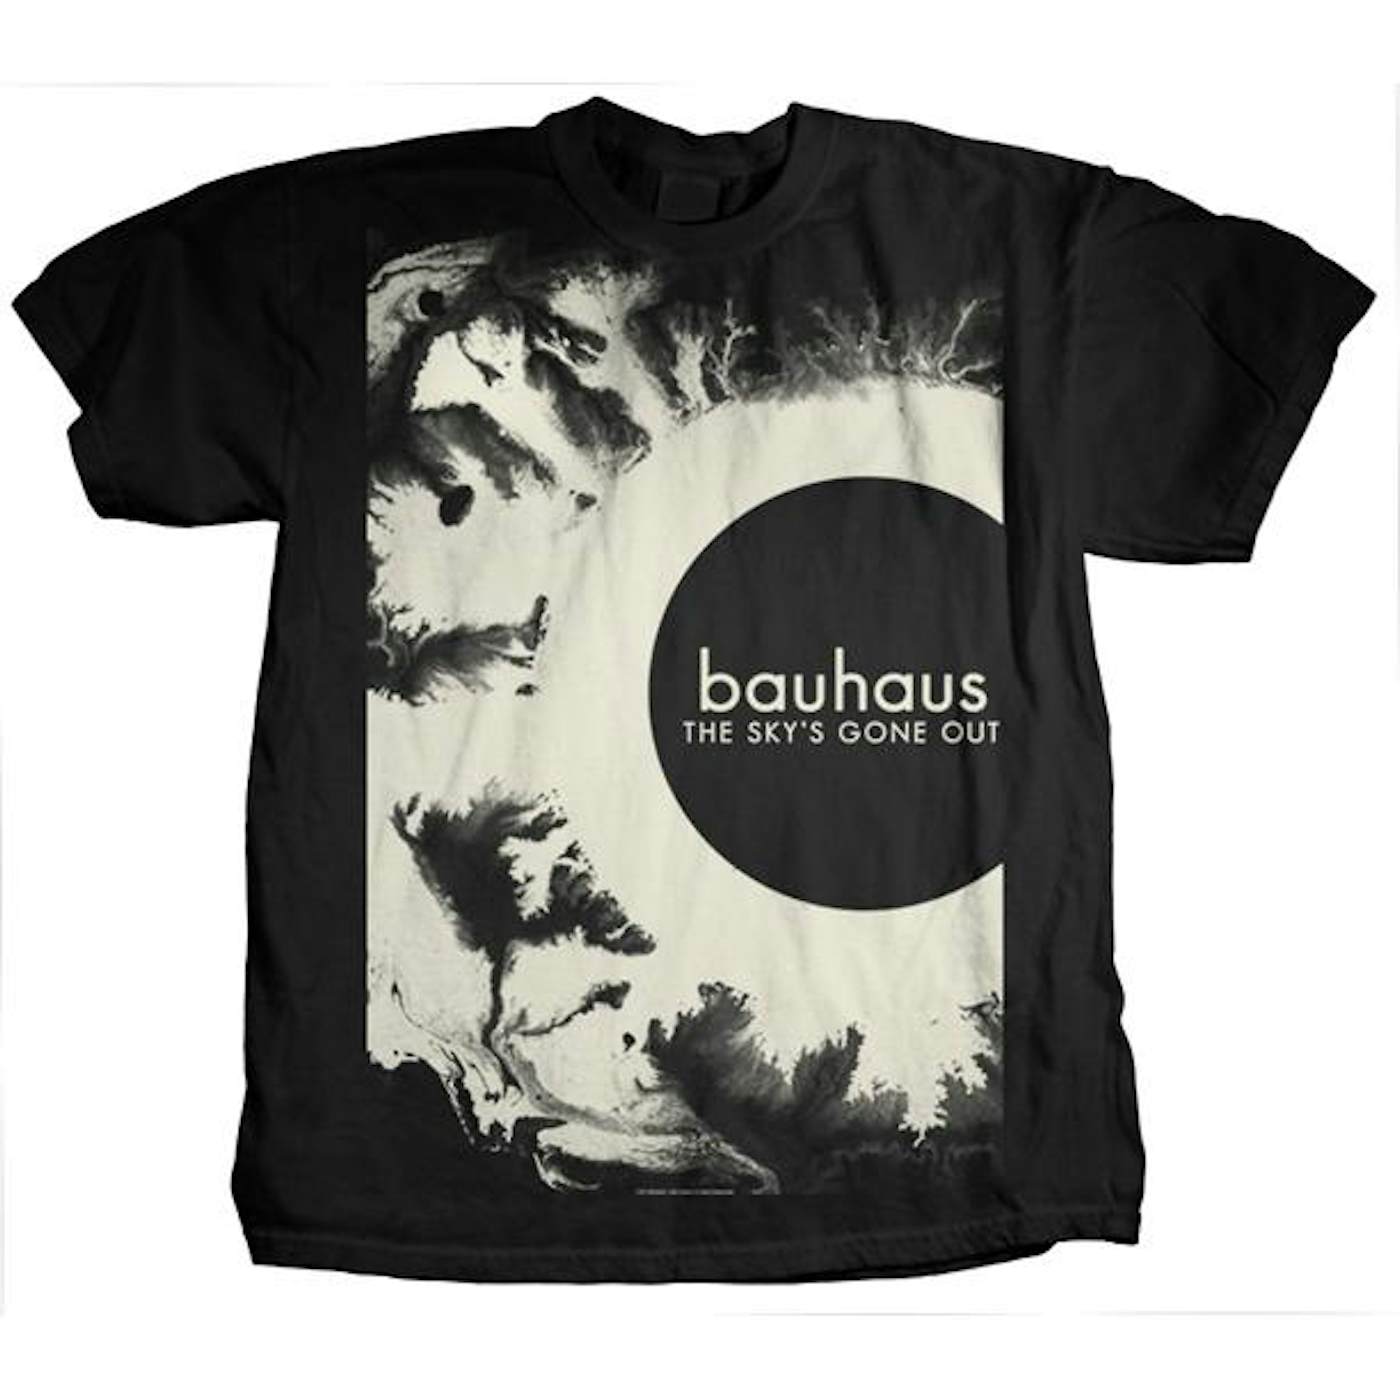 Bauhaus "The Sky's Gone Out" T-Shirt